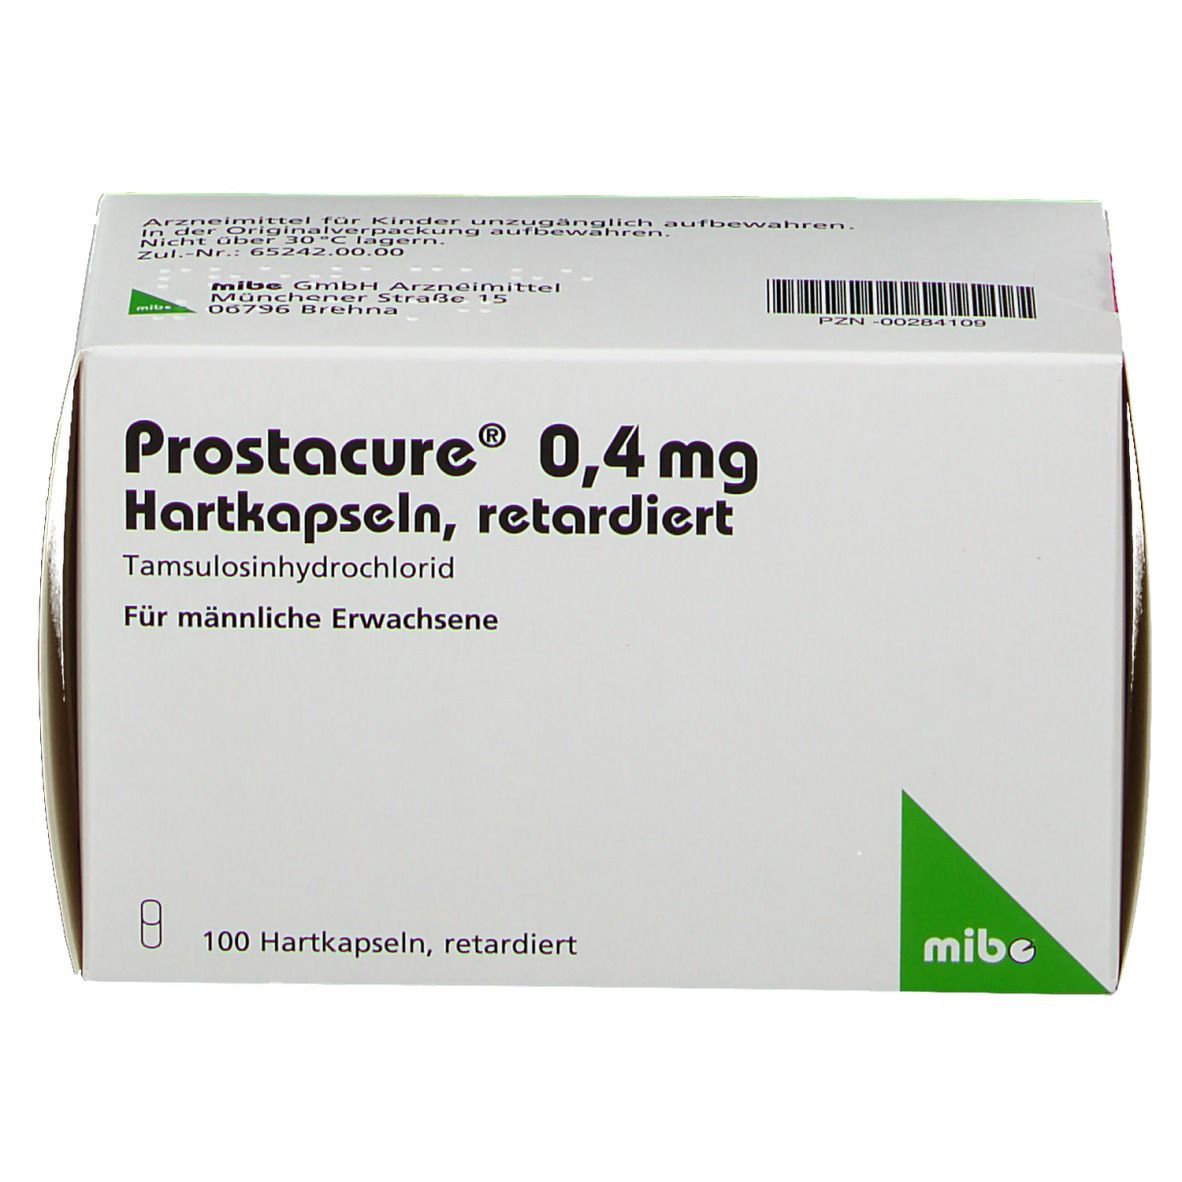 Prostacure® 0,4 mg